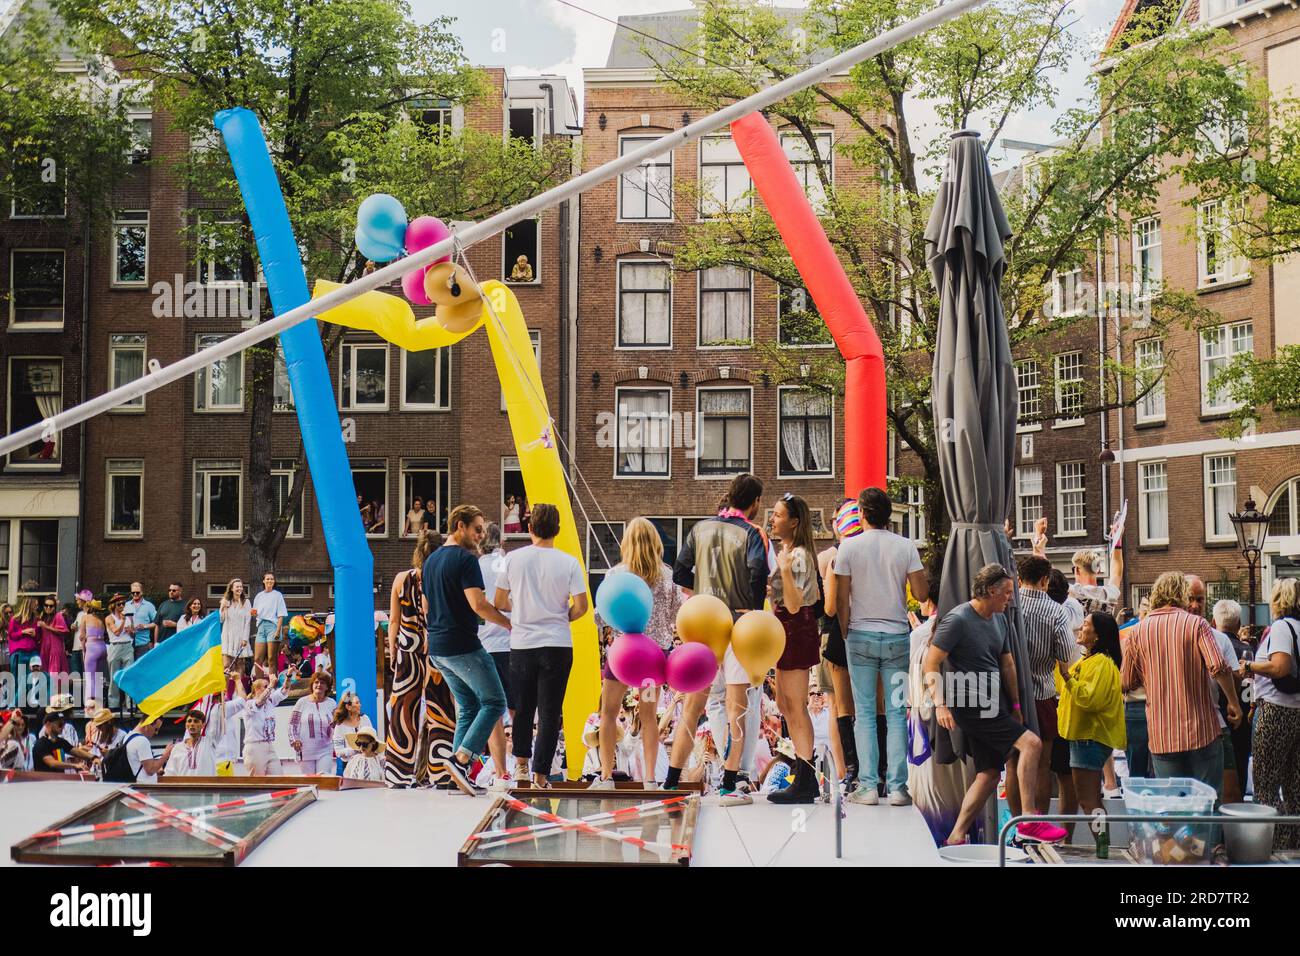 Amsterdam, North Holland, Netherlands – August 6, 2022: A crowd of people standing on a houseboat celebrates Pride Amsterdam surrounded with festive b Stock Photo